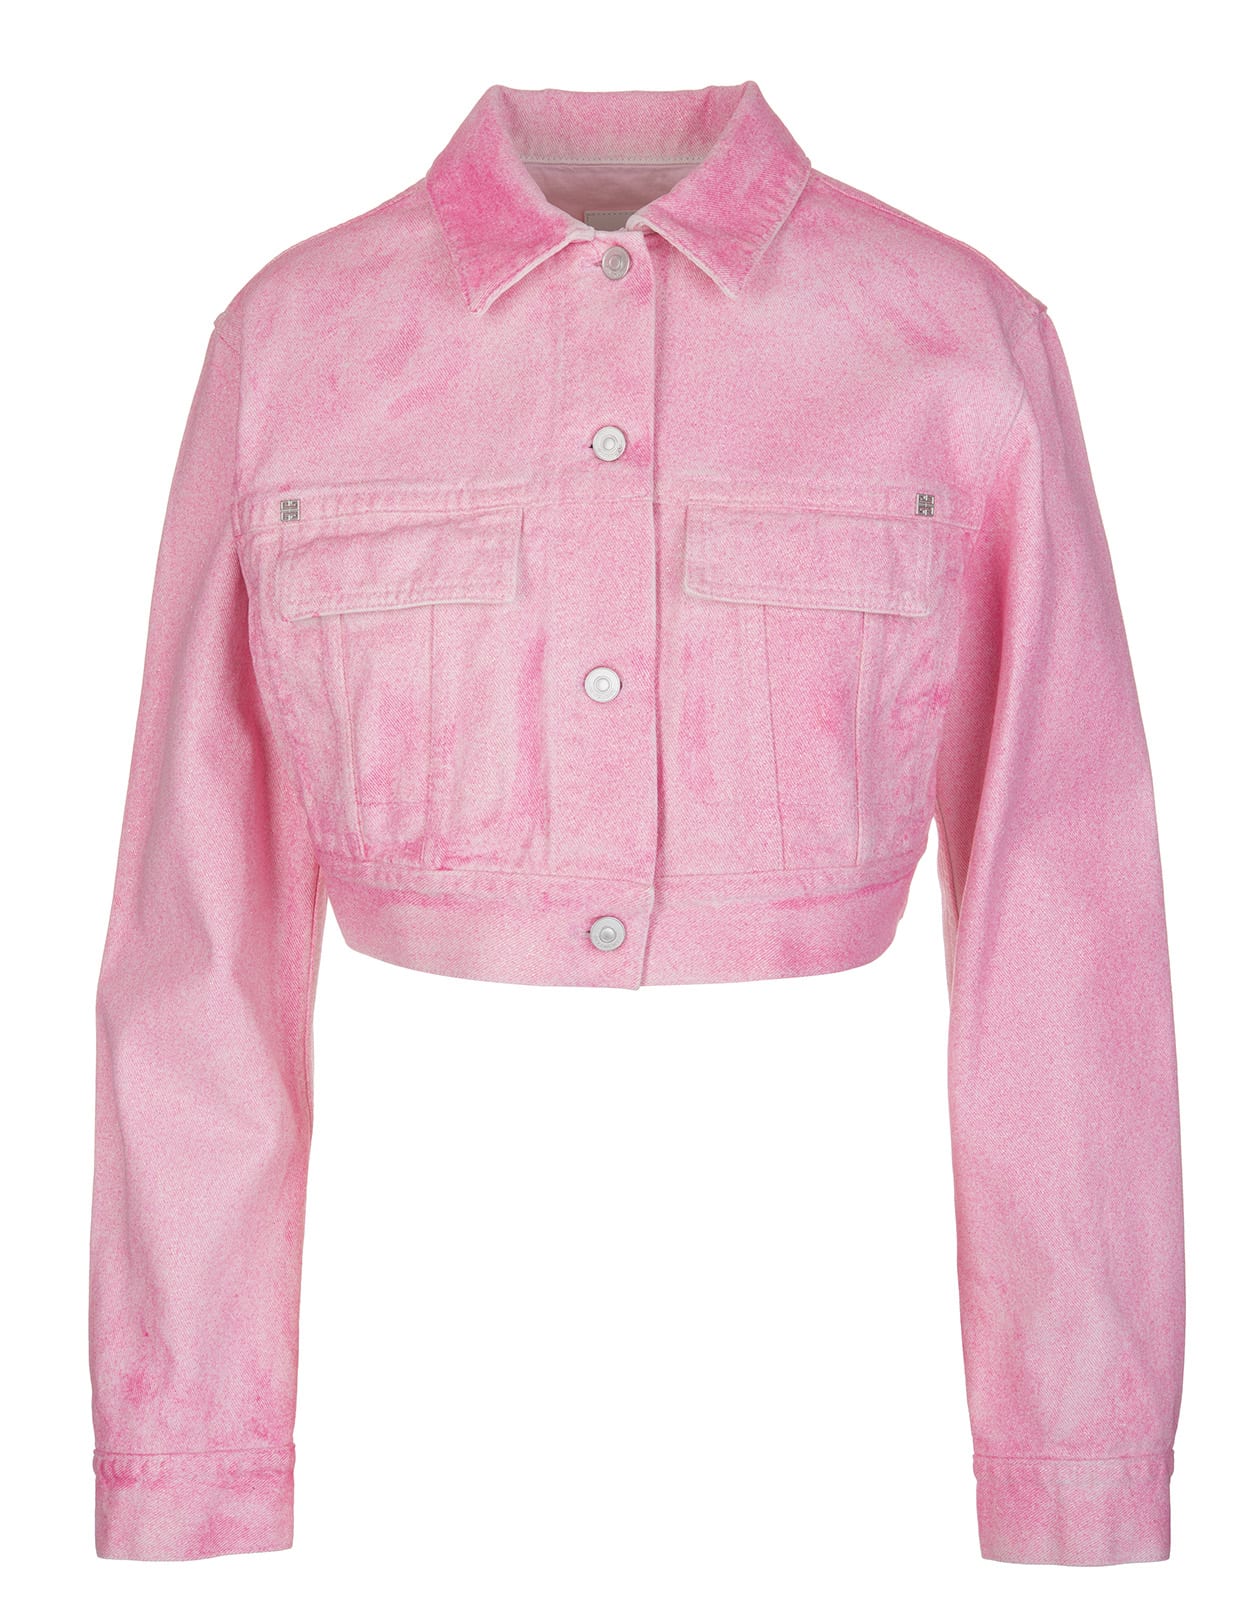 Givenchy Woman Short Jacket In Pink Denim With Sequins